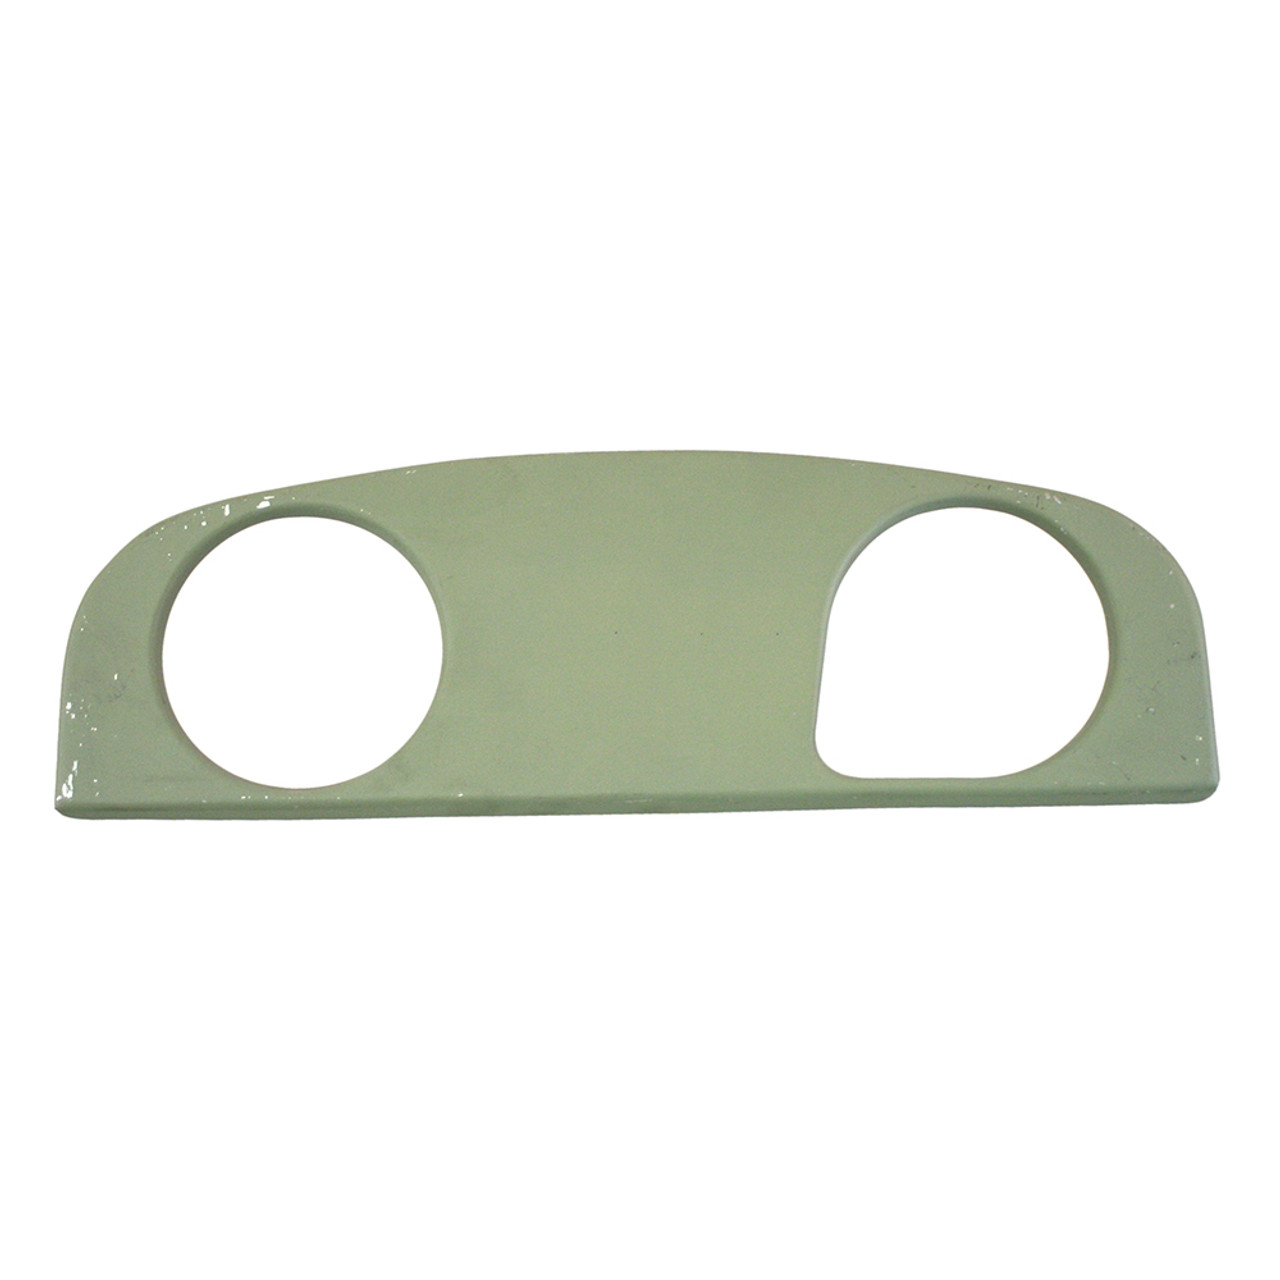 U10854-002   UNIVAIR INSTRUMENT PANEL TOP COVER - 2 HOLE - FITS PIPER